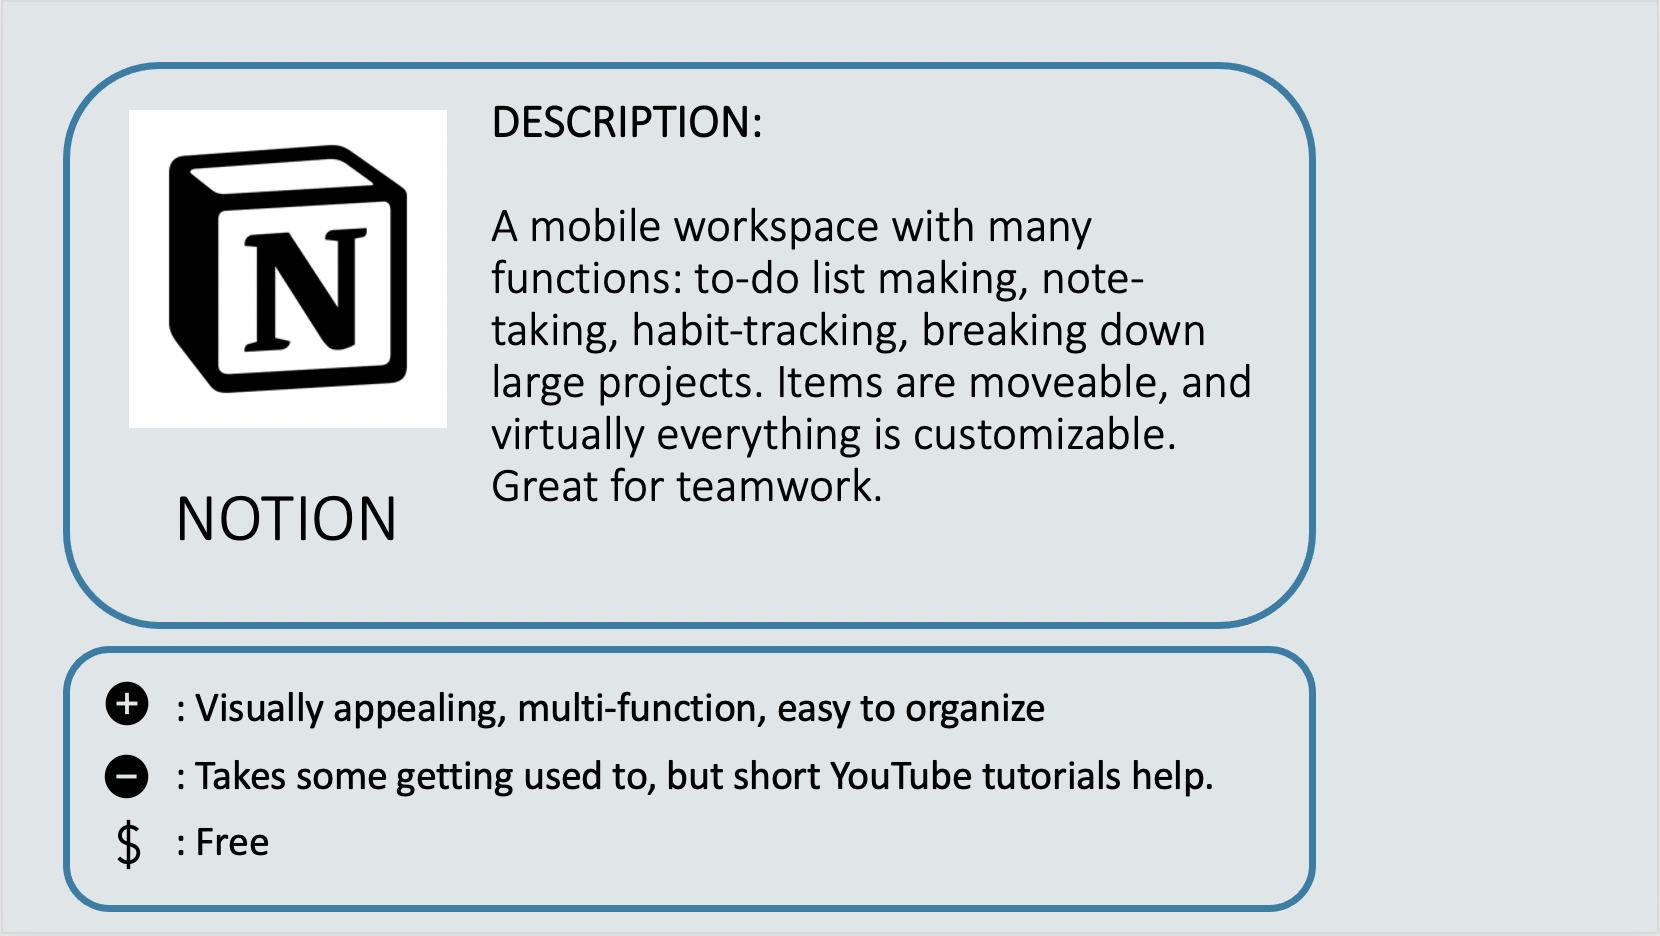 NOTION - A mobile workspace with many functions: to-do list making, note-taking, habit-tracking, breaking down large projects. Items are moveable, and virtually everything is customizable. Great for teamwork. Positive: Visually appealing, multi-function, easy to organize. Negative: Takes some getting used to, but short YouTube tutorials help. Cost: Free.